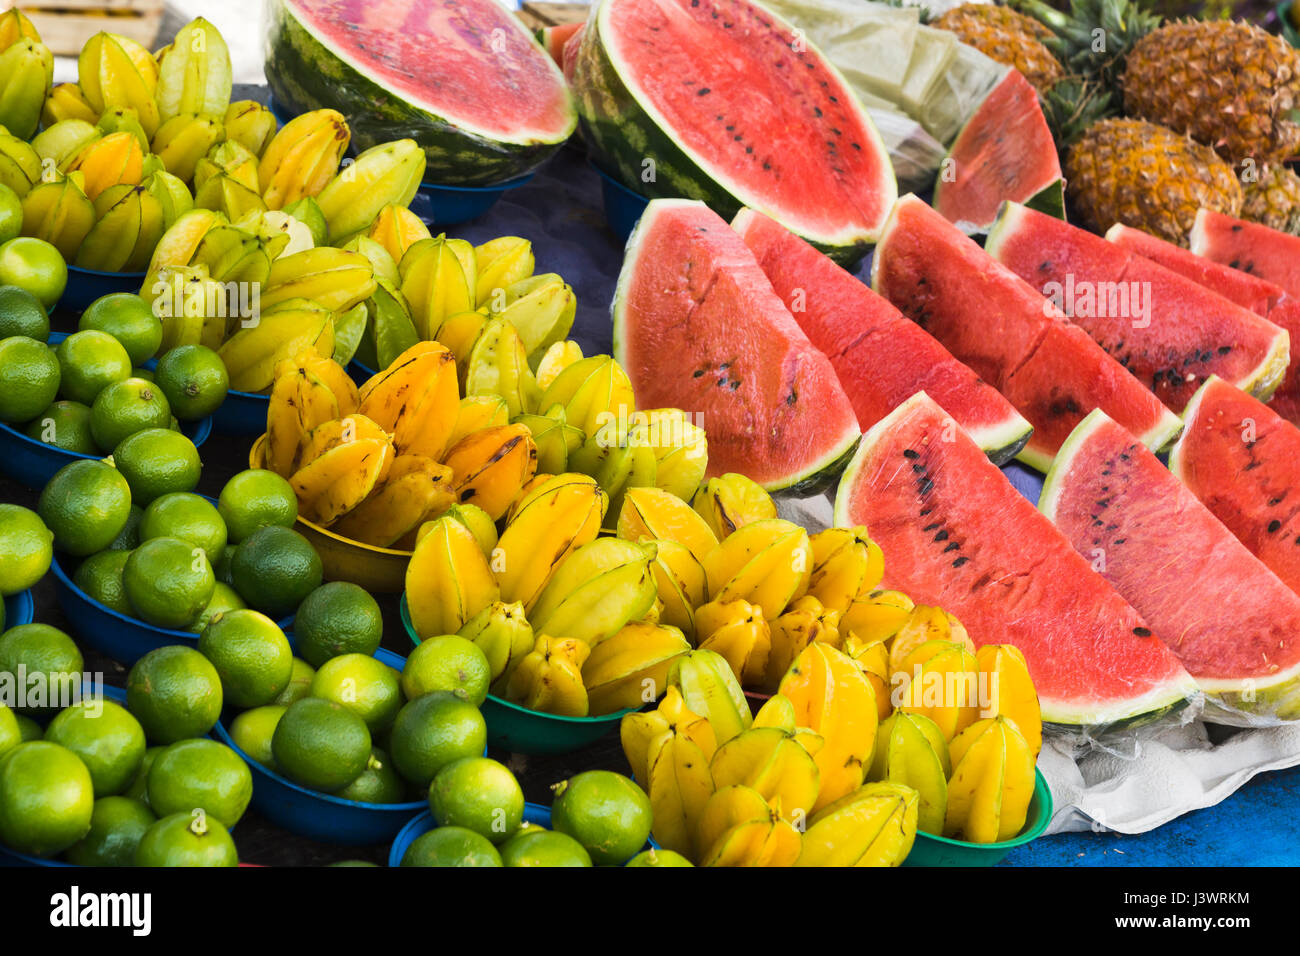 brazilian markets offer a huge  variation of fruits and vegetables Stock Photo